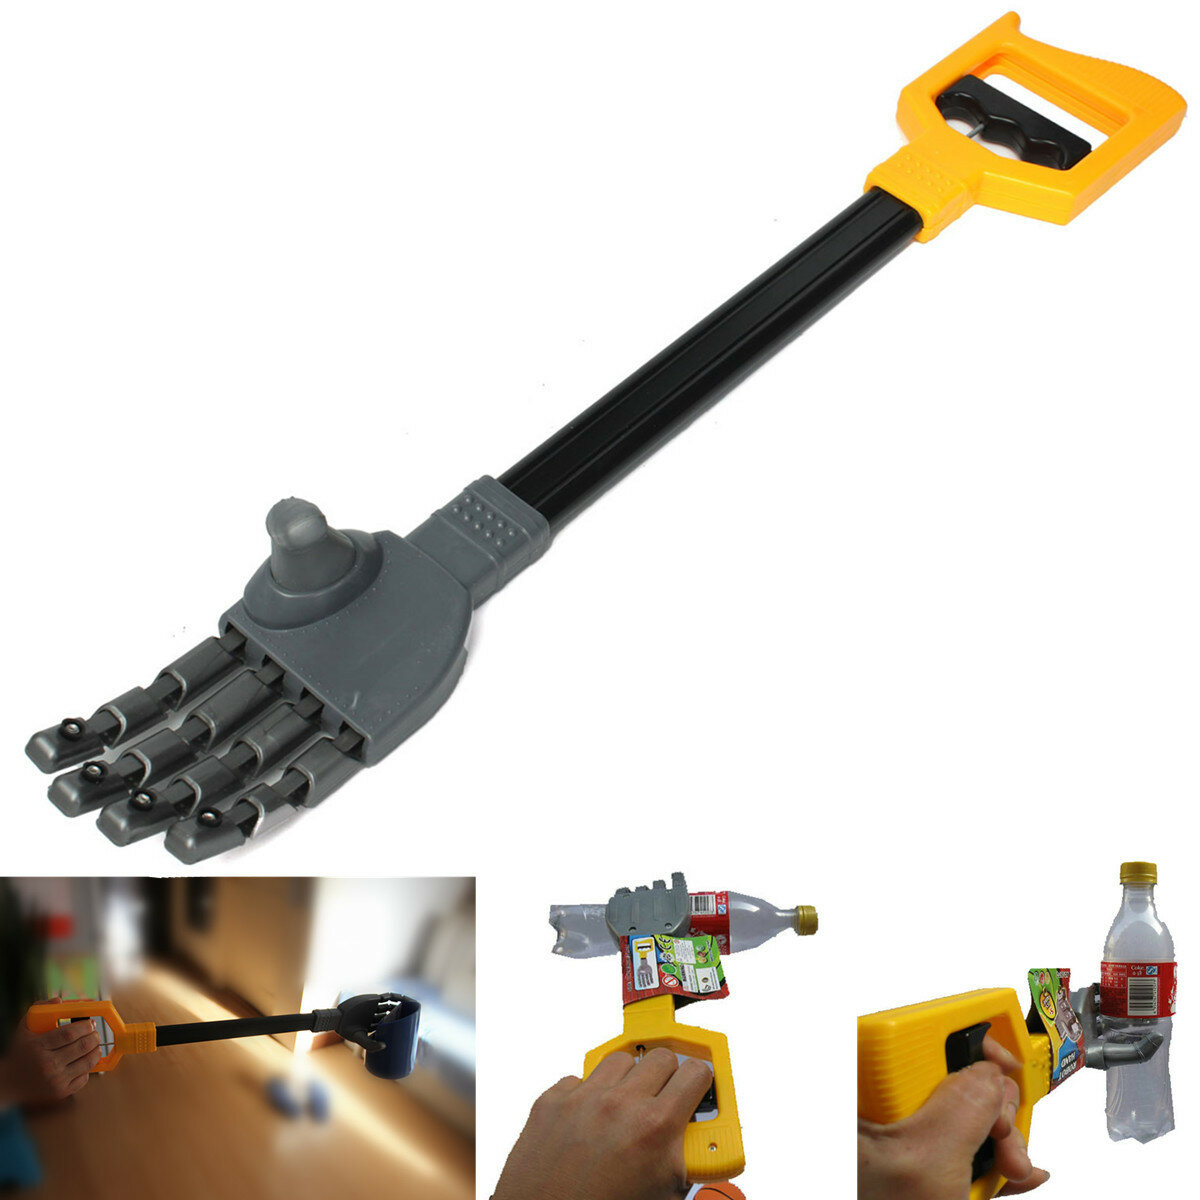 

Plastic Robot Claw Hand Grabber Grabbing Stick Kid Boy Toy Move and Grab Things